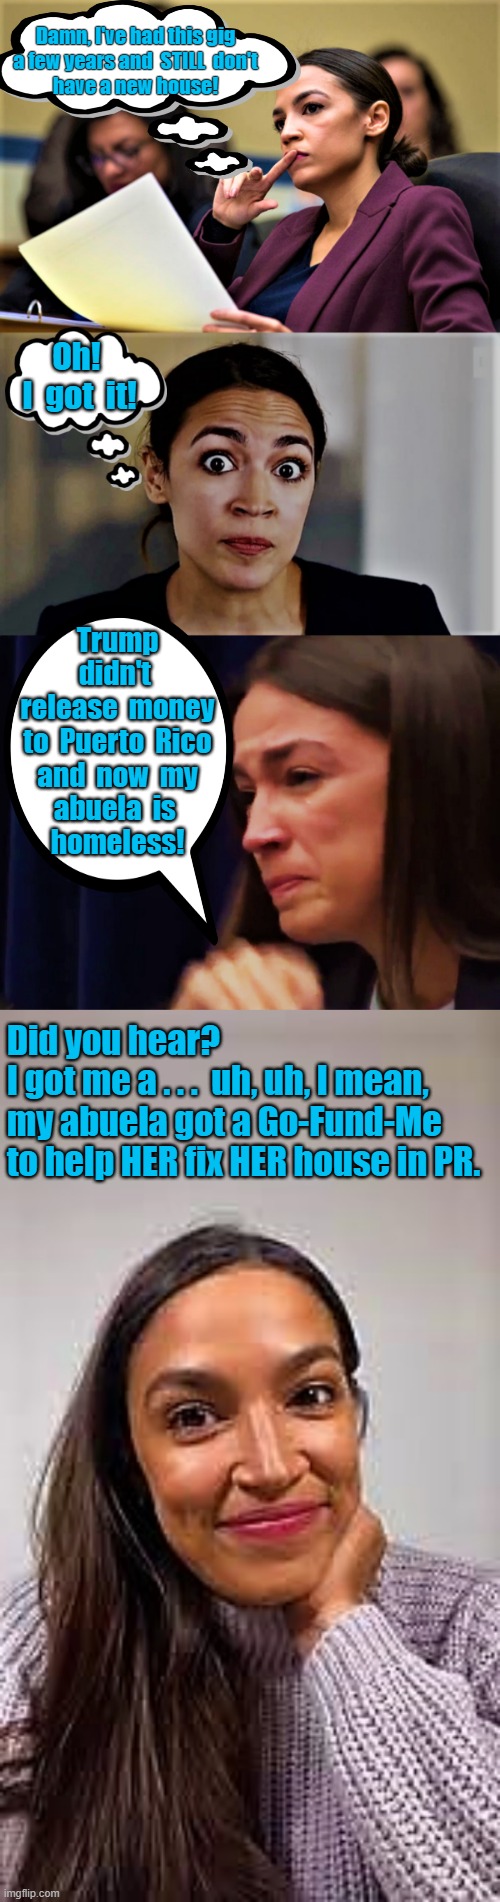 aoc thinking and scheming | Damn, I've had this gig
a few years and  STILL  don't
have a new house! Oh! 
I  got  it! Trump
didn't 
release  money
to  Puerto  Rico
and  now  my
abuela  is 
homeless! Did you hear? 
I got me a . . .  uh, uh, I mean,  
my abuela got a Go-Fund-Me 
to help HER fix HER house in PR. | image tagged in political humor,aoc,donald trump,puerto rico,congress,house | made w/ Imgflip meme maker